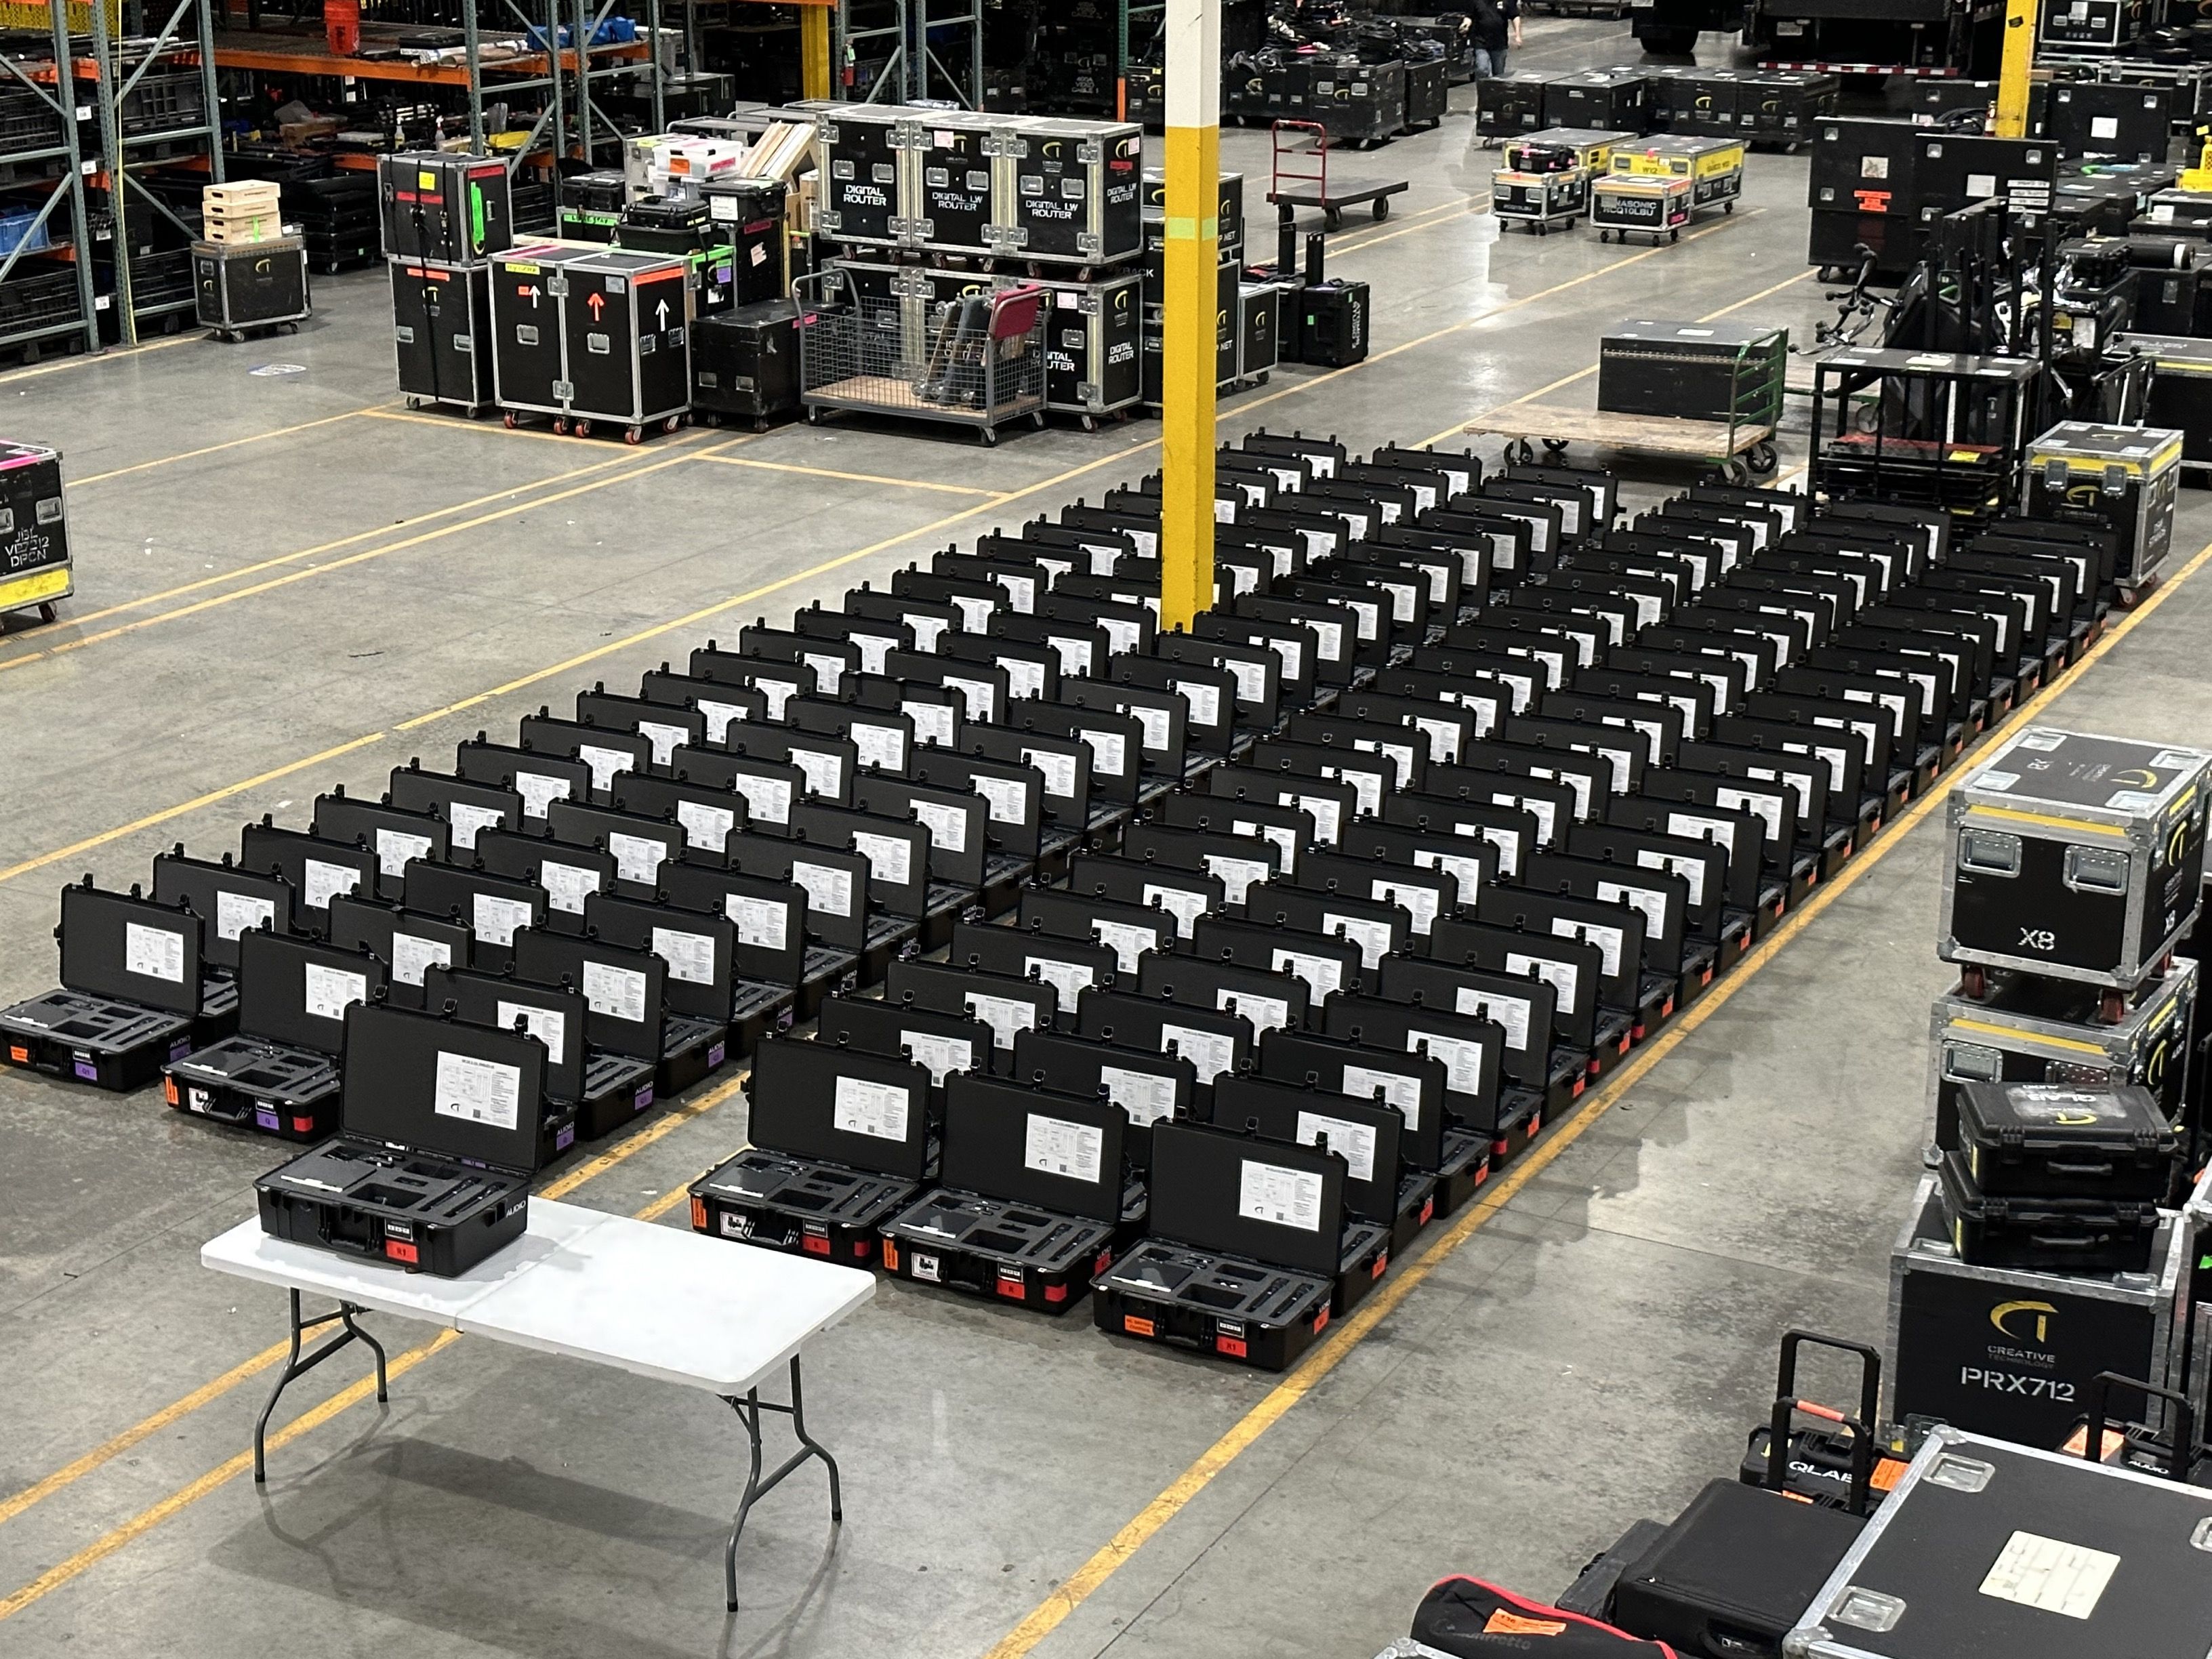 CTUS has assembled and deployed 140 custom wireless microphone kits — each with the Sennheiser EW-DX wireless system at its core — to streamline its ability to deliver high-quality audio for mission critical events across the U.S. (Photo courtesy CTUS)